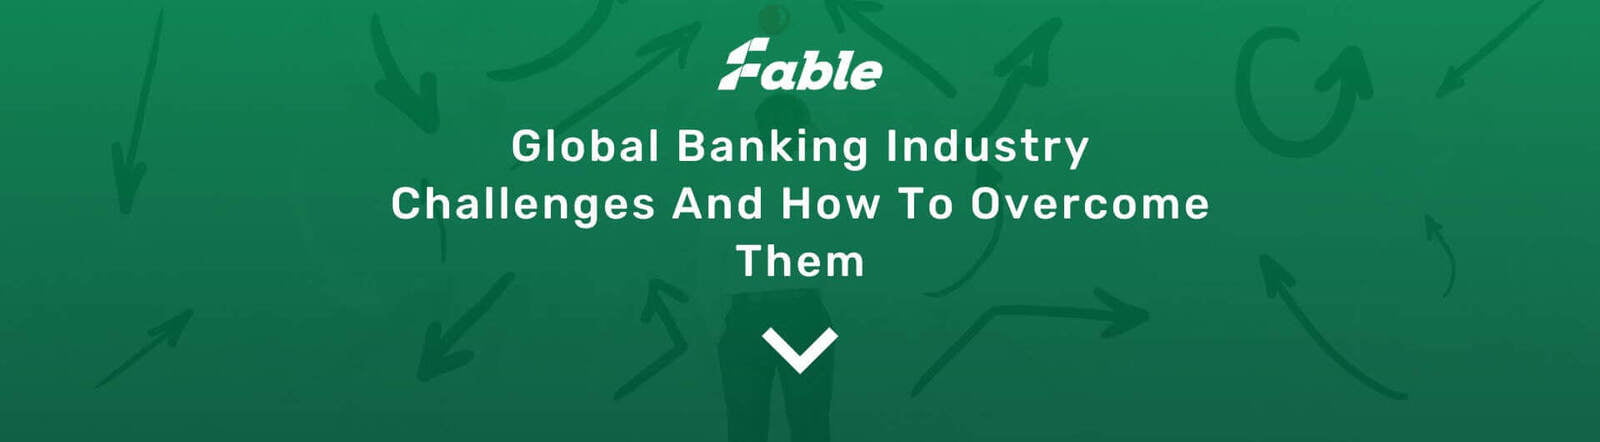 Global Banking Industry Challenges And How To Overcome Them